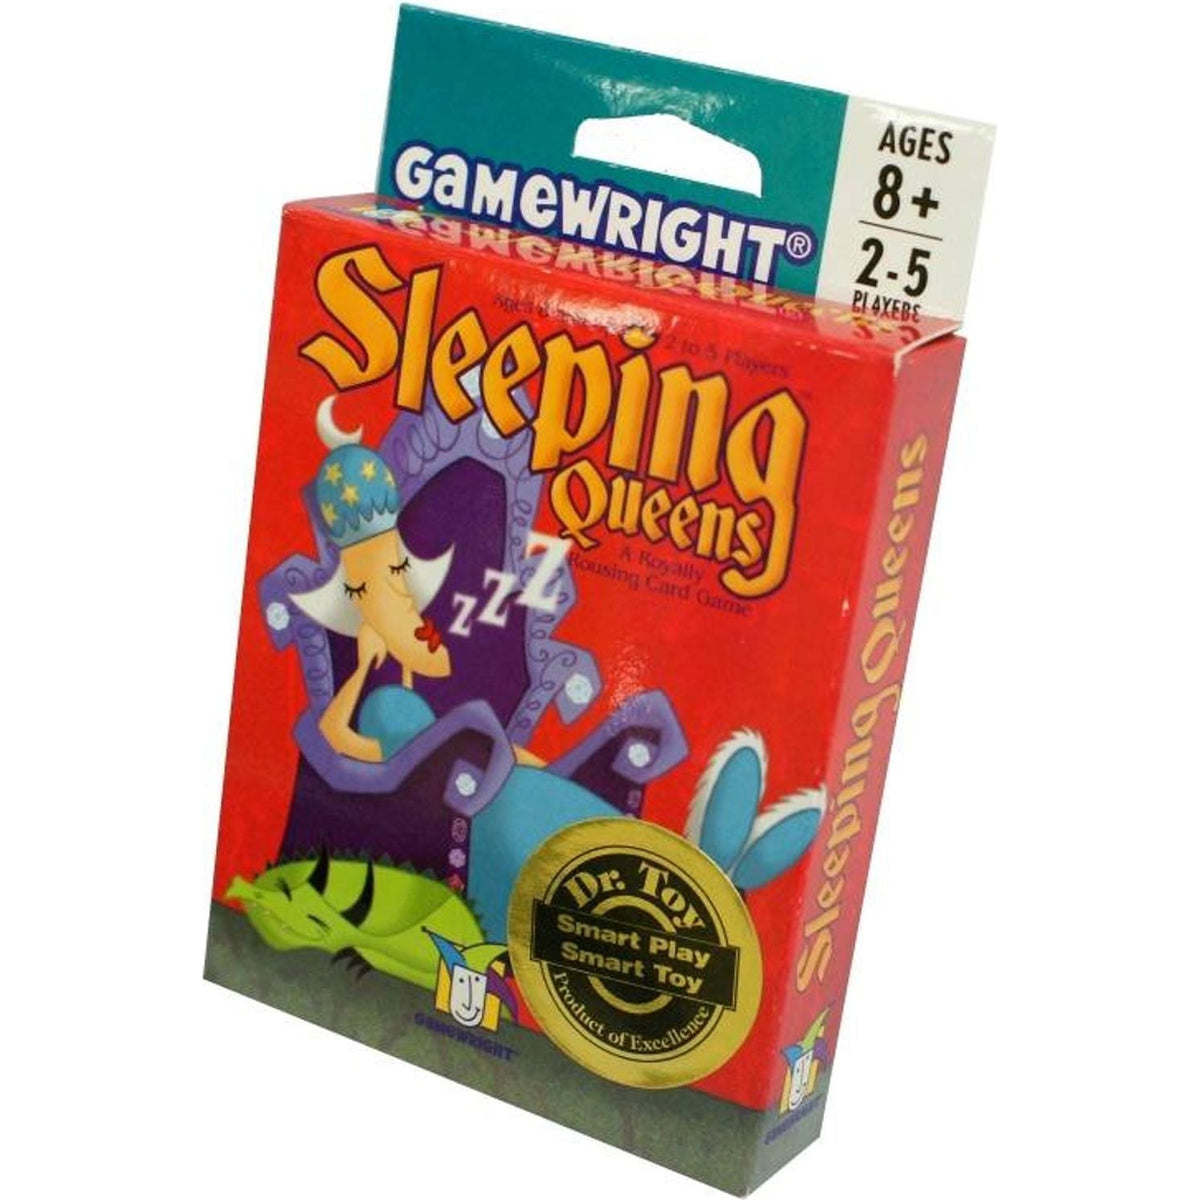 Sleeping Queens Card Game - Toybox Tales